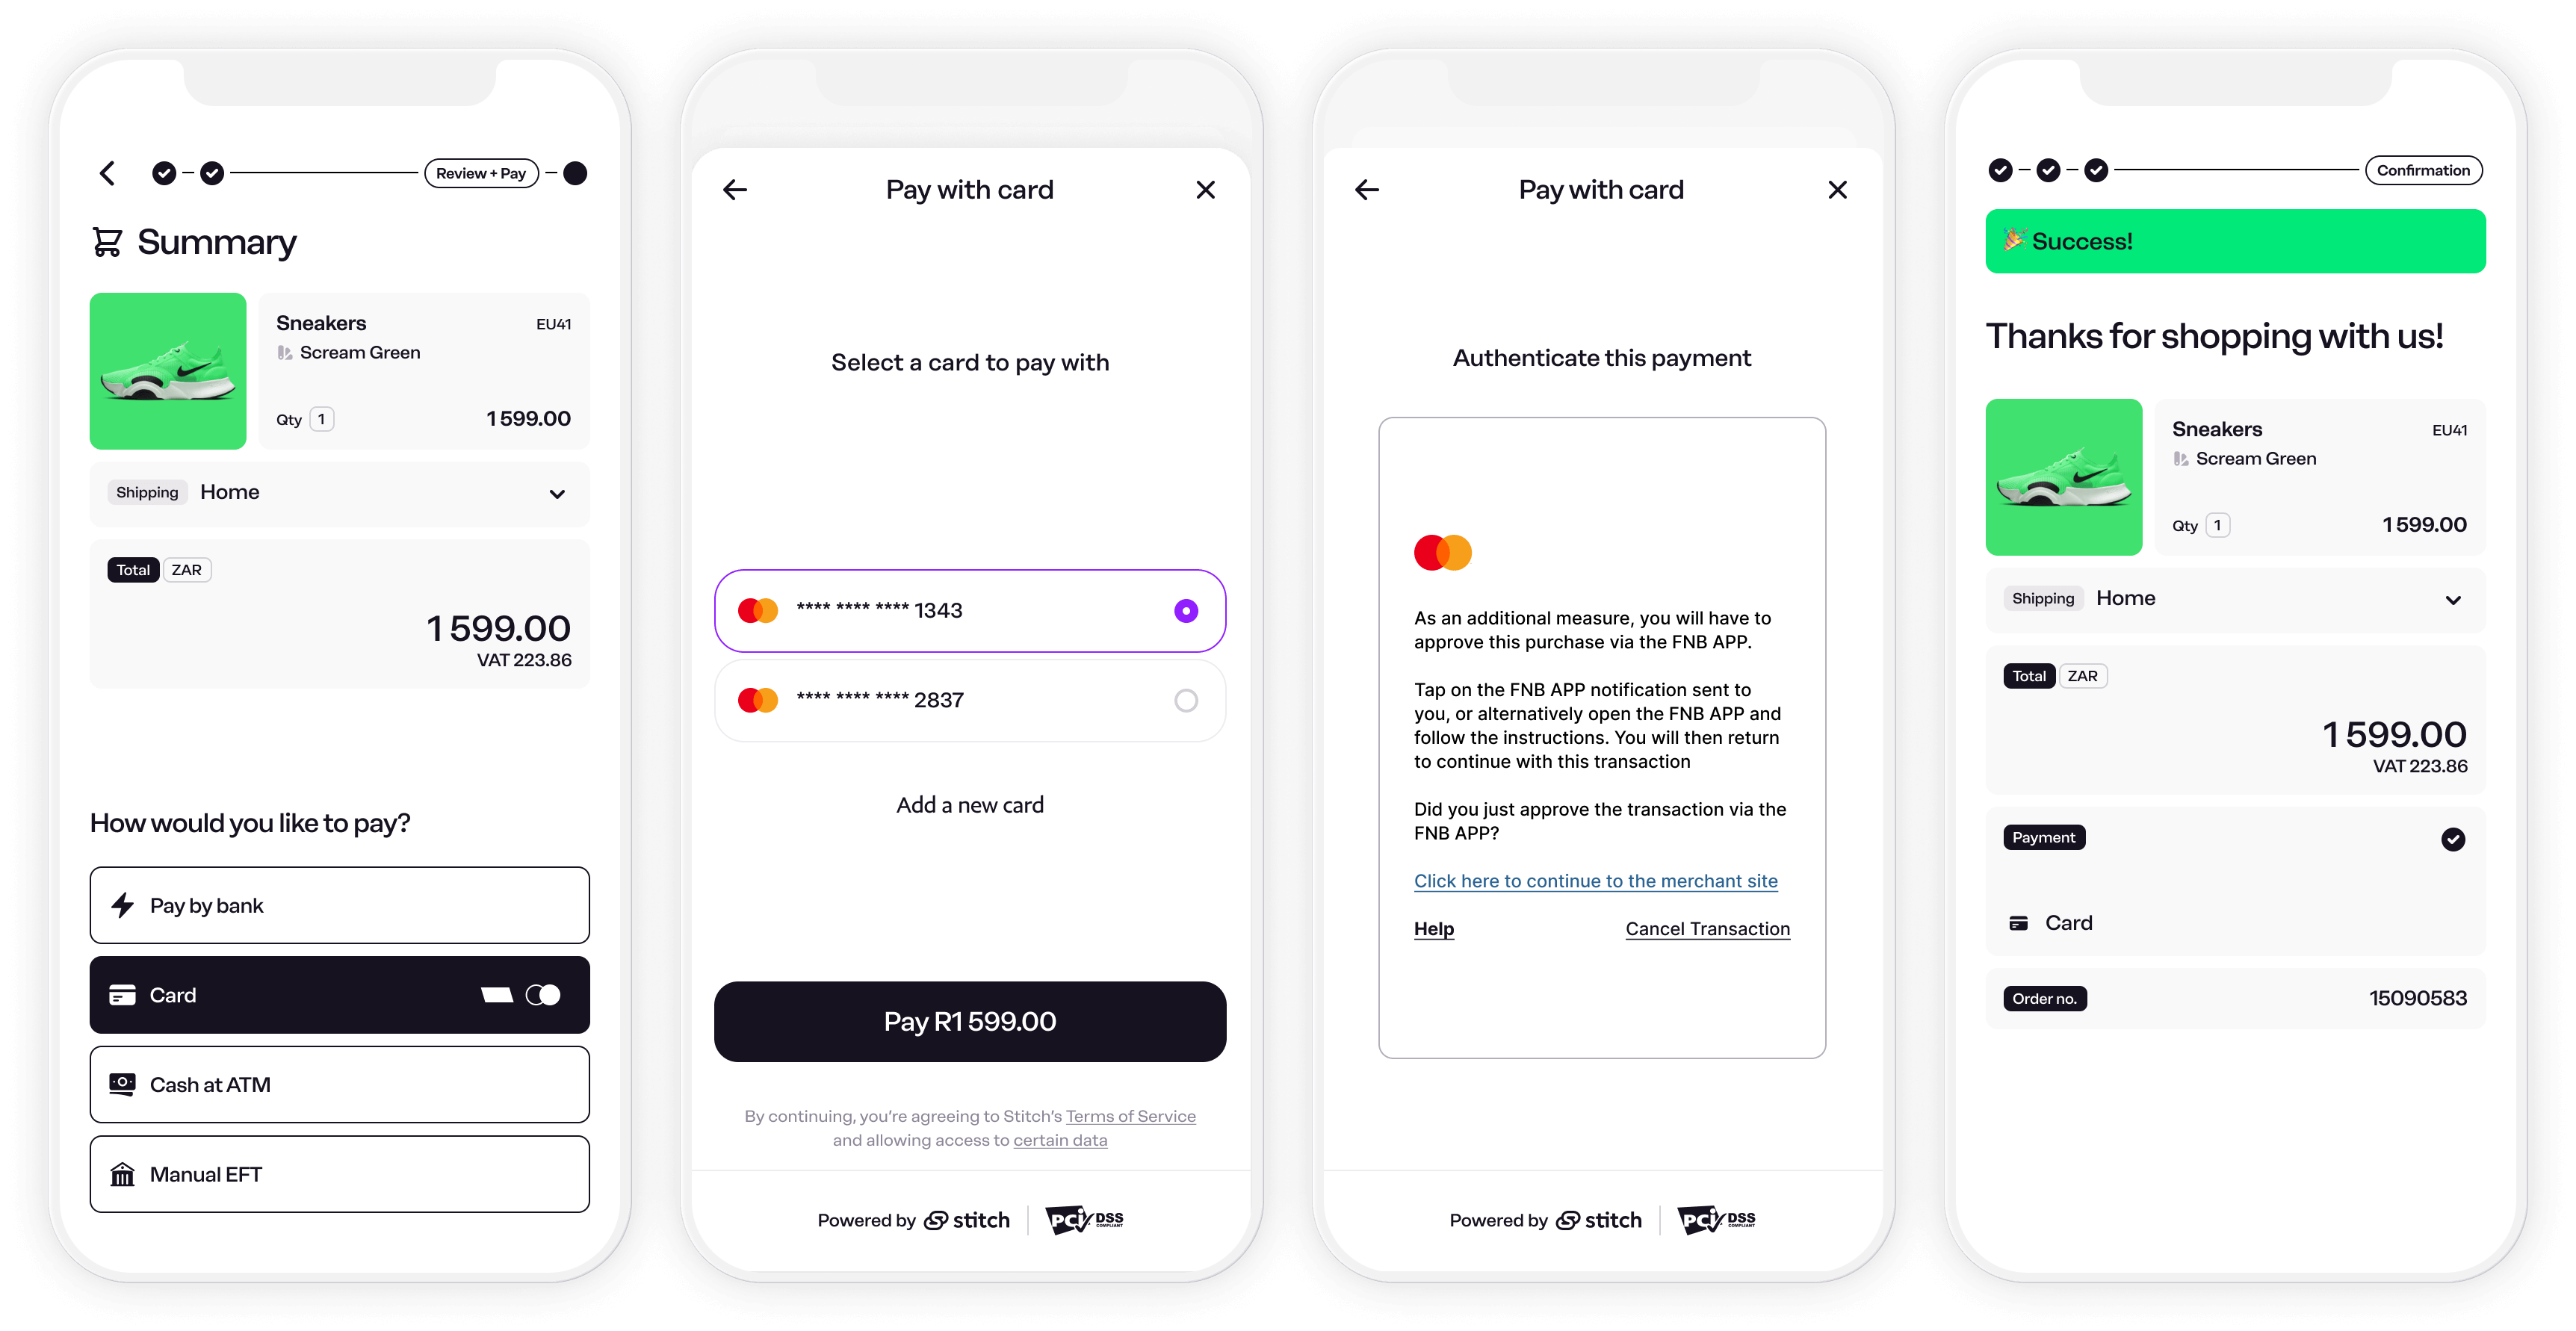 Stitch Card - Returning user flow with “remember me” functionality enabled for subsequent payments.png